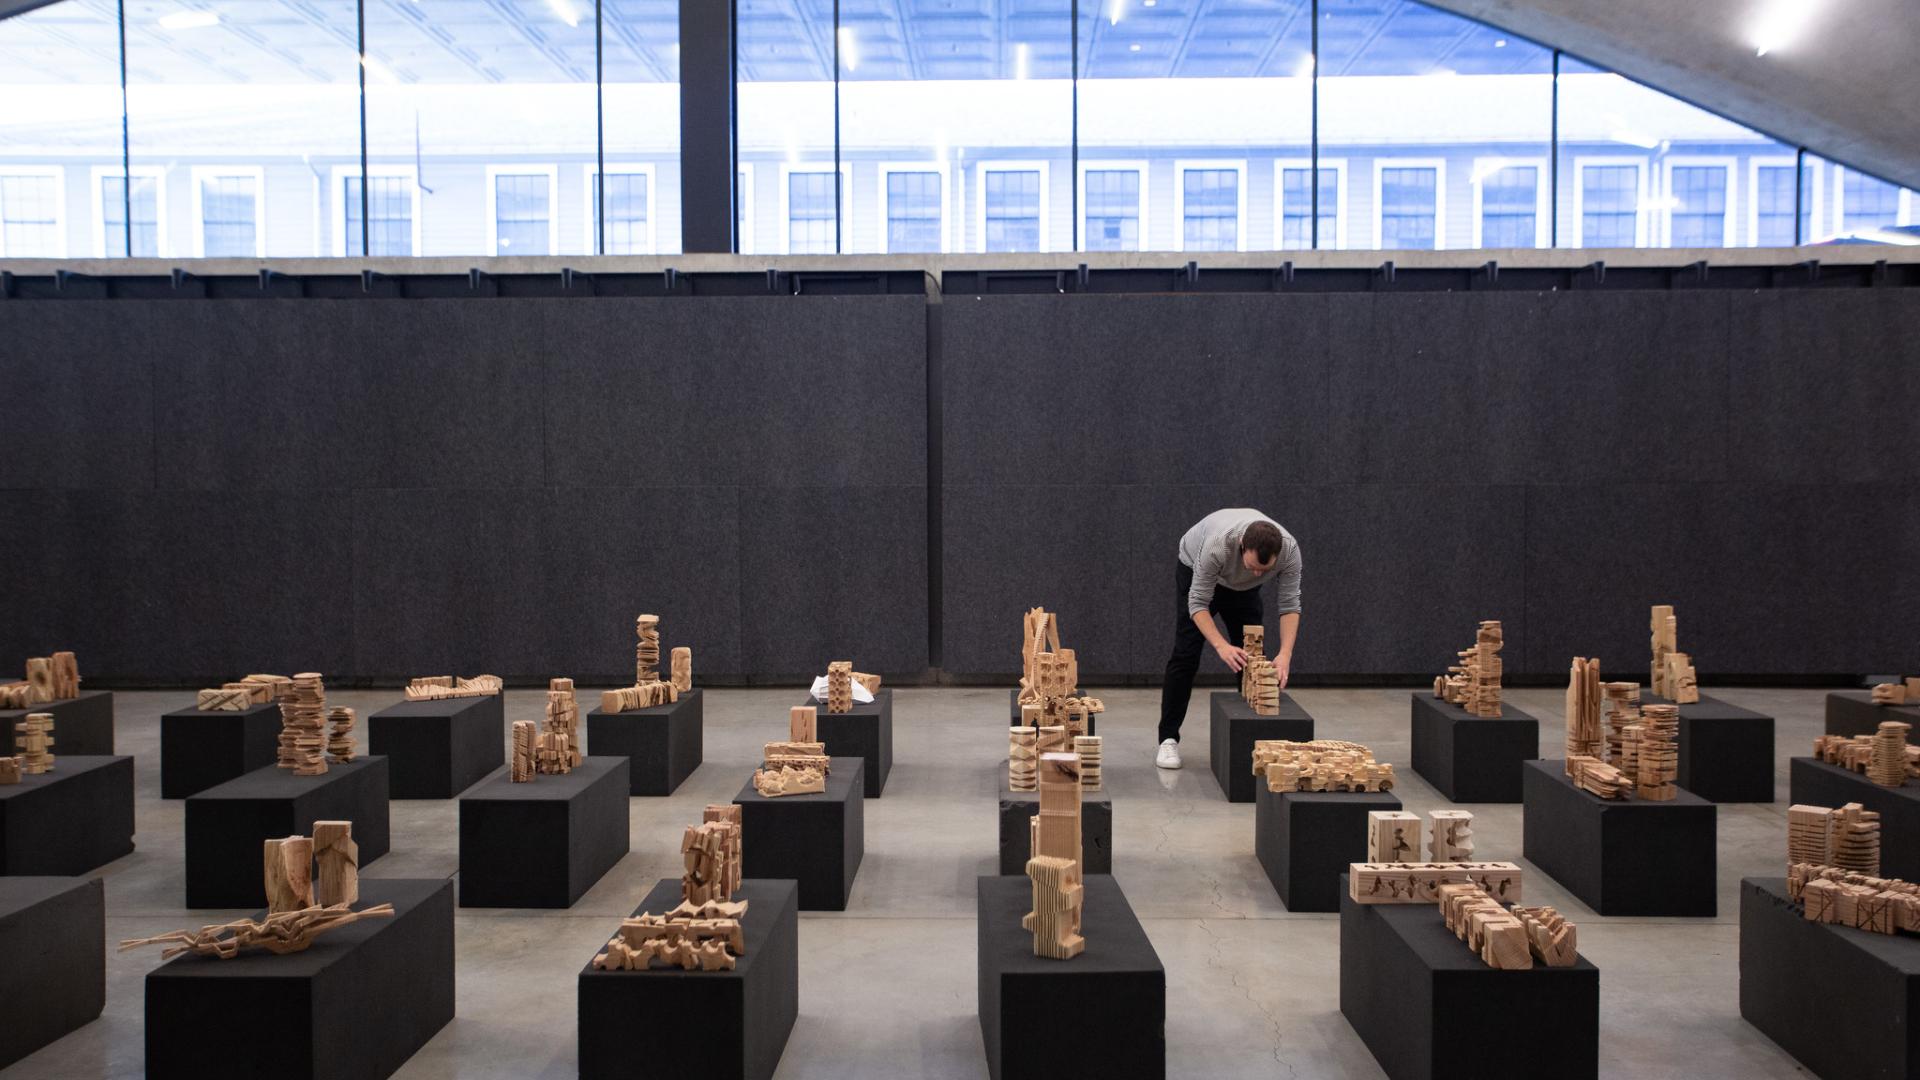 A person setting up architectural models on black pedestals.